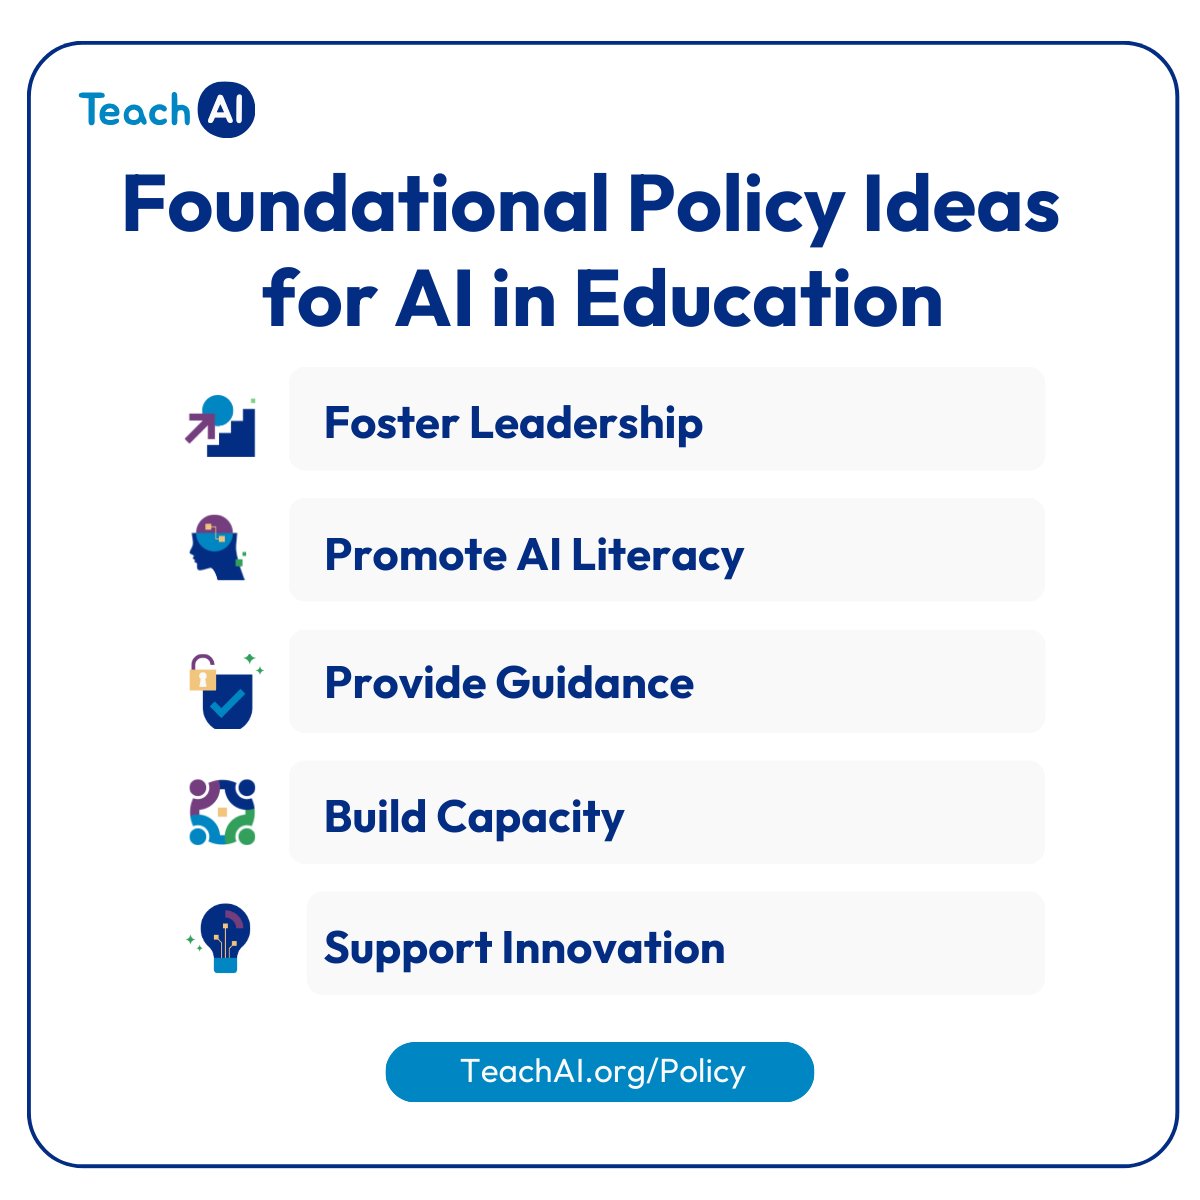 Proud to be part of the #TeachAI initiative that's aligning educators with resources to help them better understand how #computerscience can fit into classroom instruction. Get started with 'Foundational Policy Ideas for AI in Education': teachai.org/policy